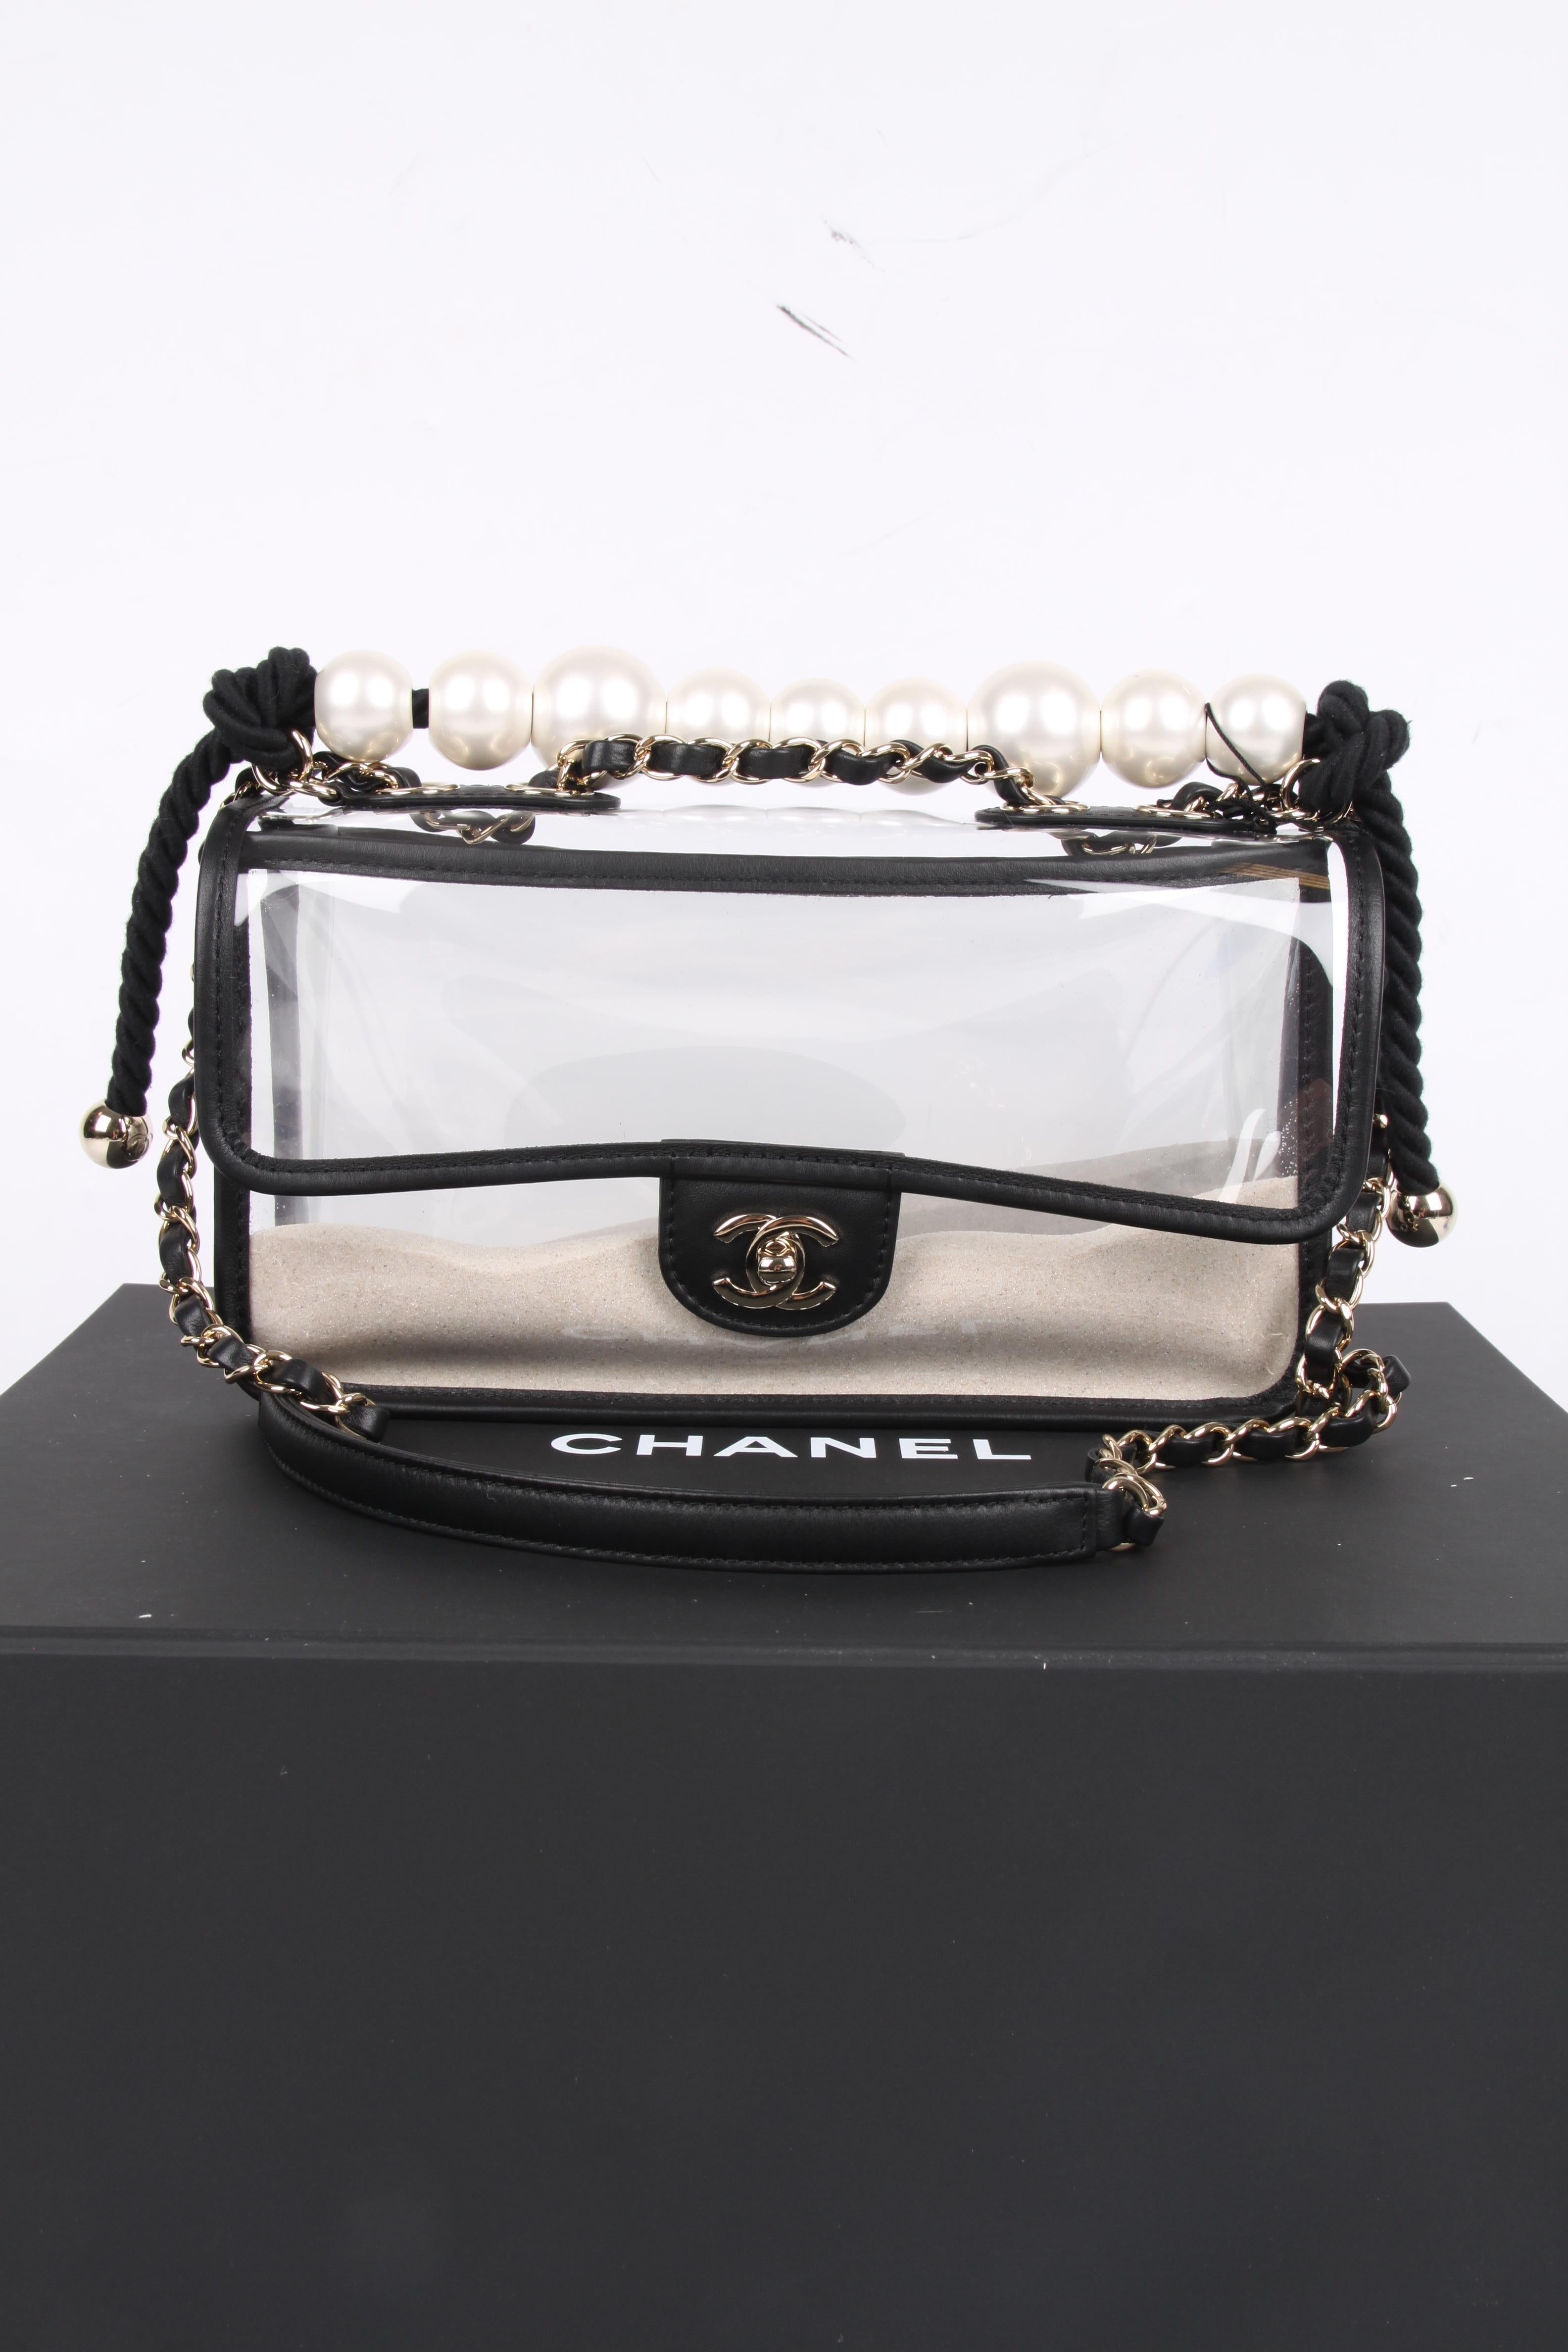 Storefresh! This is a very special item!

A see-through Chanel Flap Bag with a layer of sand on the front and bag. Front closure with a gold-tone CC turnlock.

On top you find a shoulder chain which is entwined with black leather, it can be worn